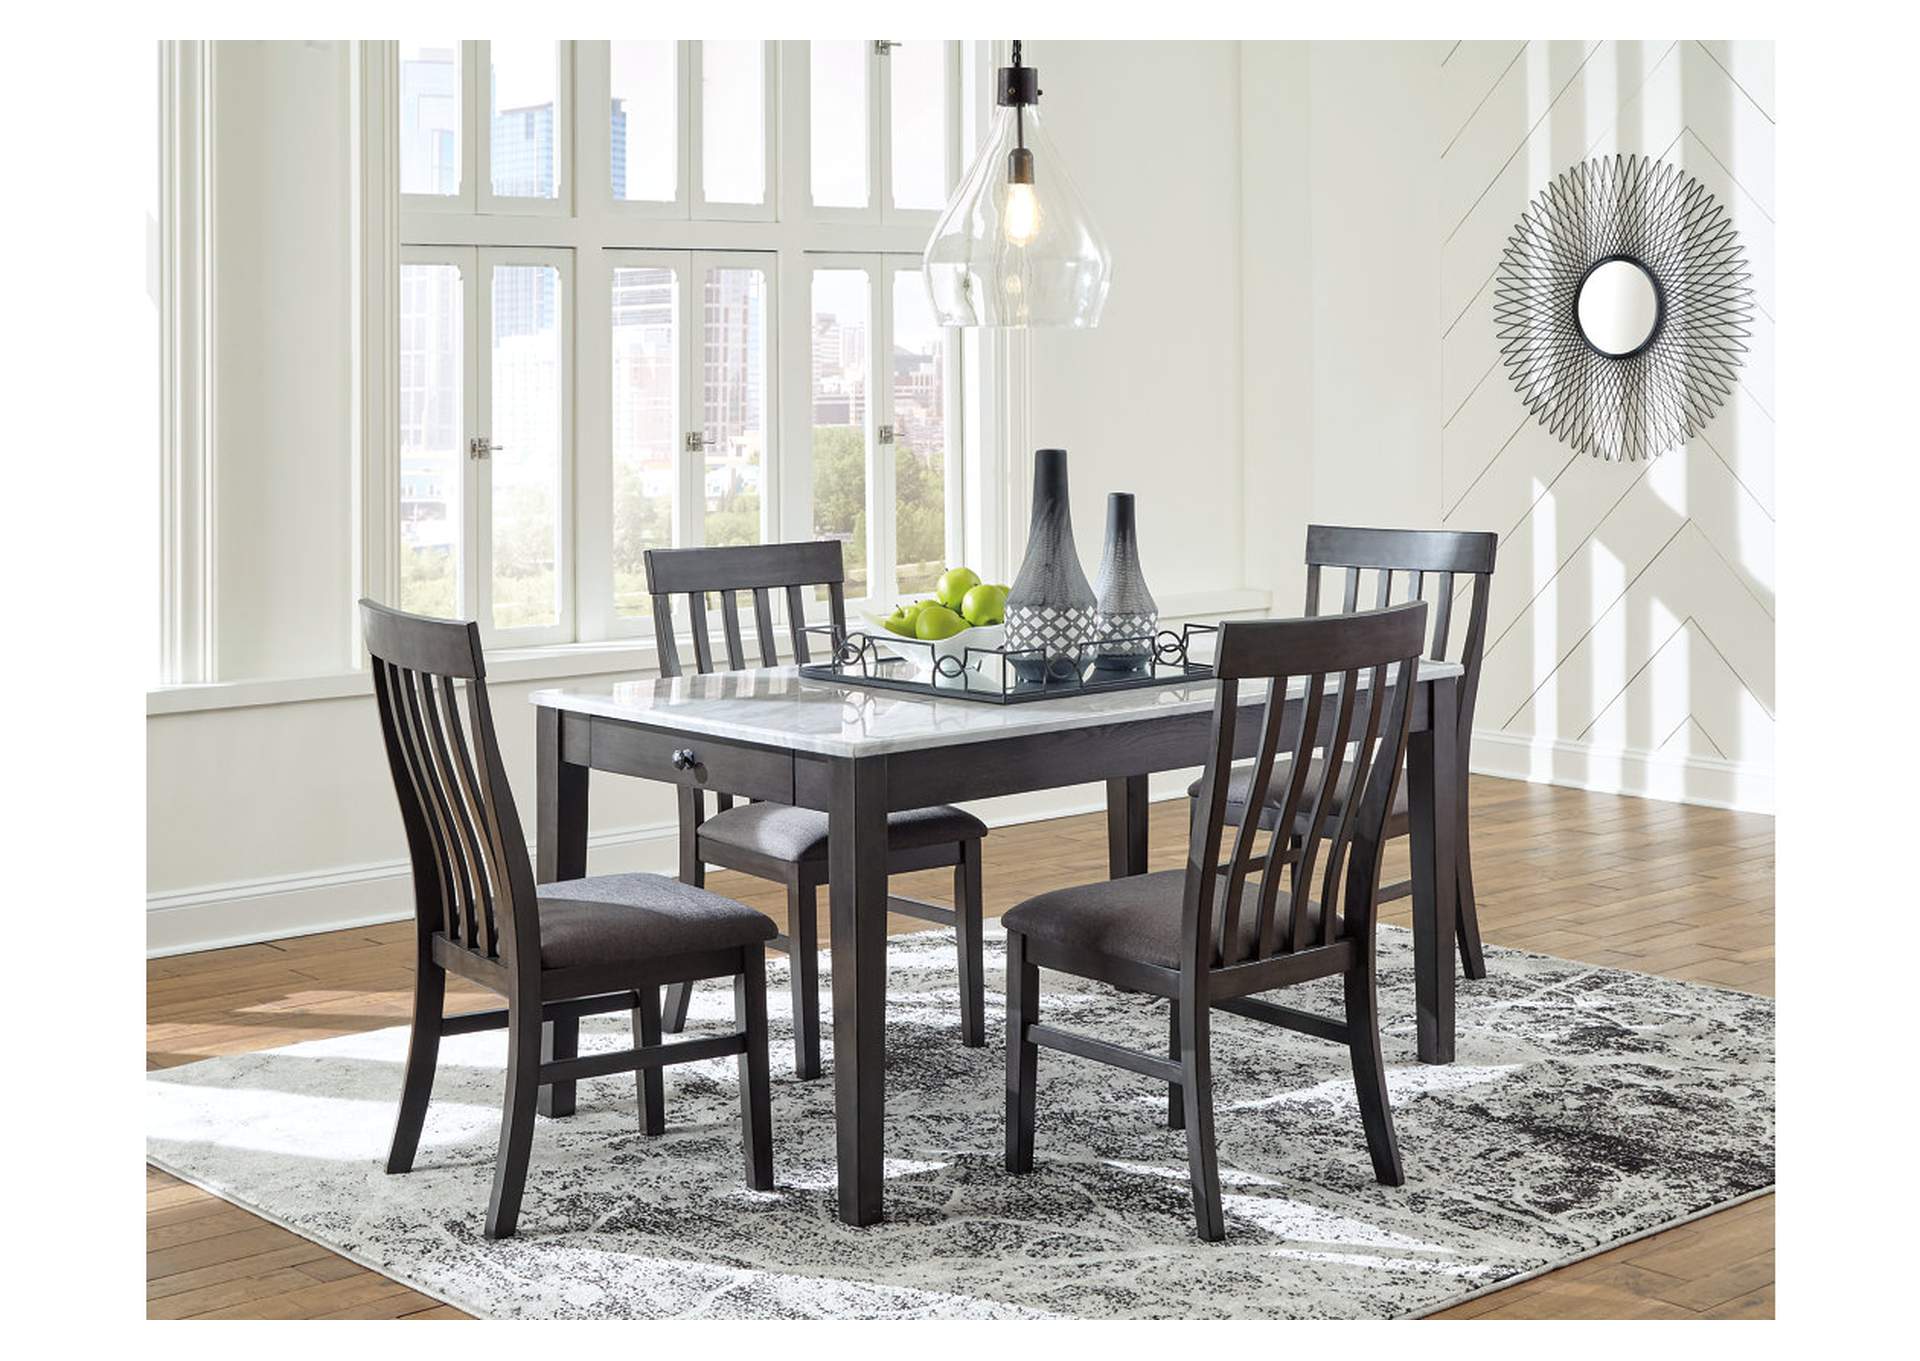 Luvoni Charcoal Dining Table W 4 Side, Charcoal Dining Room Set